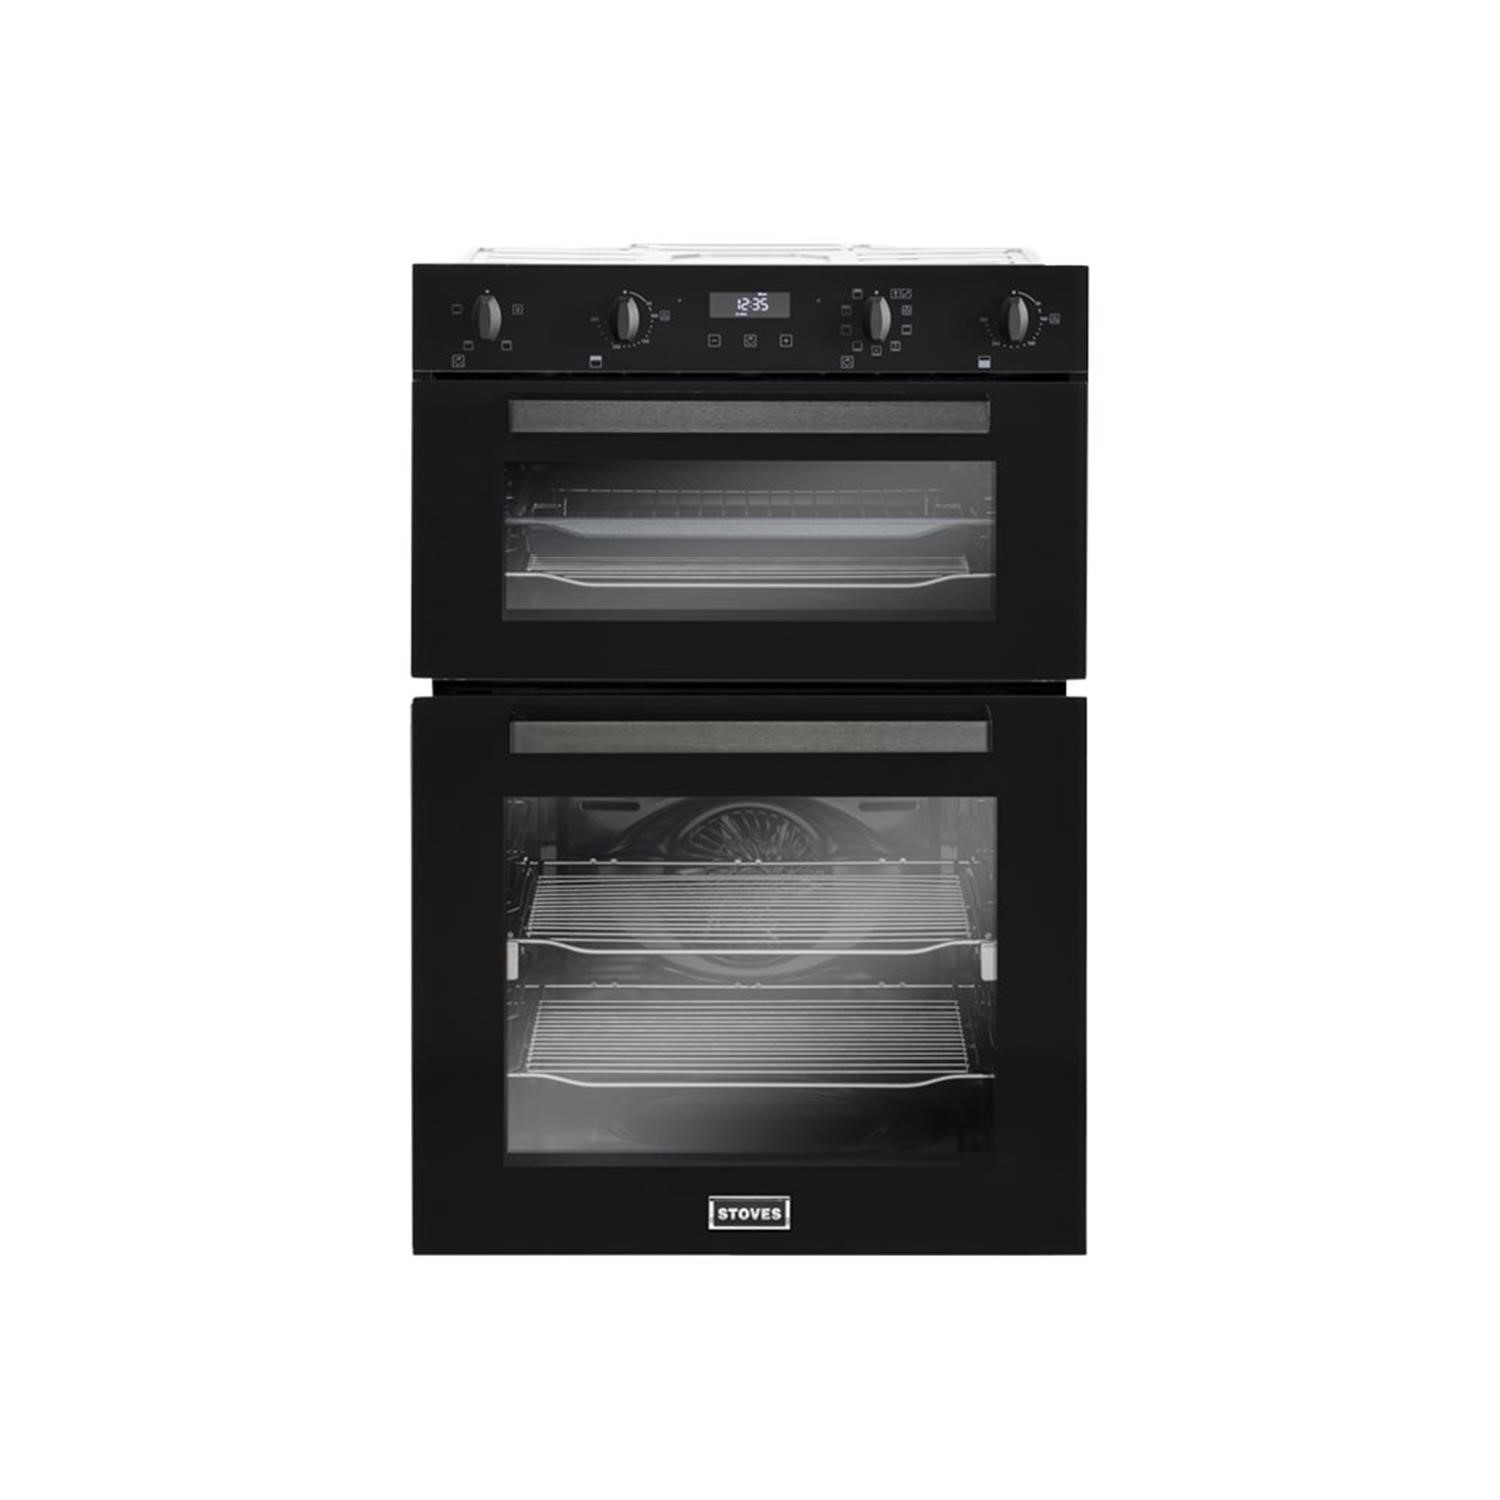 Refurbished Stoves ST BI902MFCT 90cm Double Built In Electric Oven